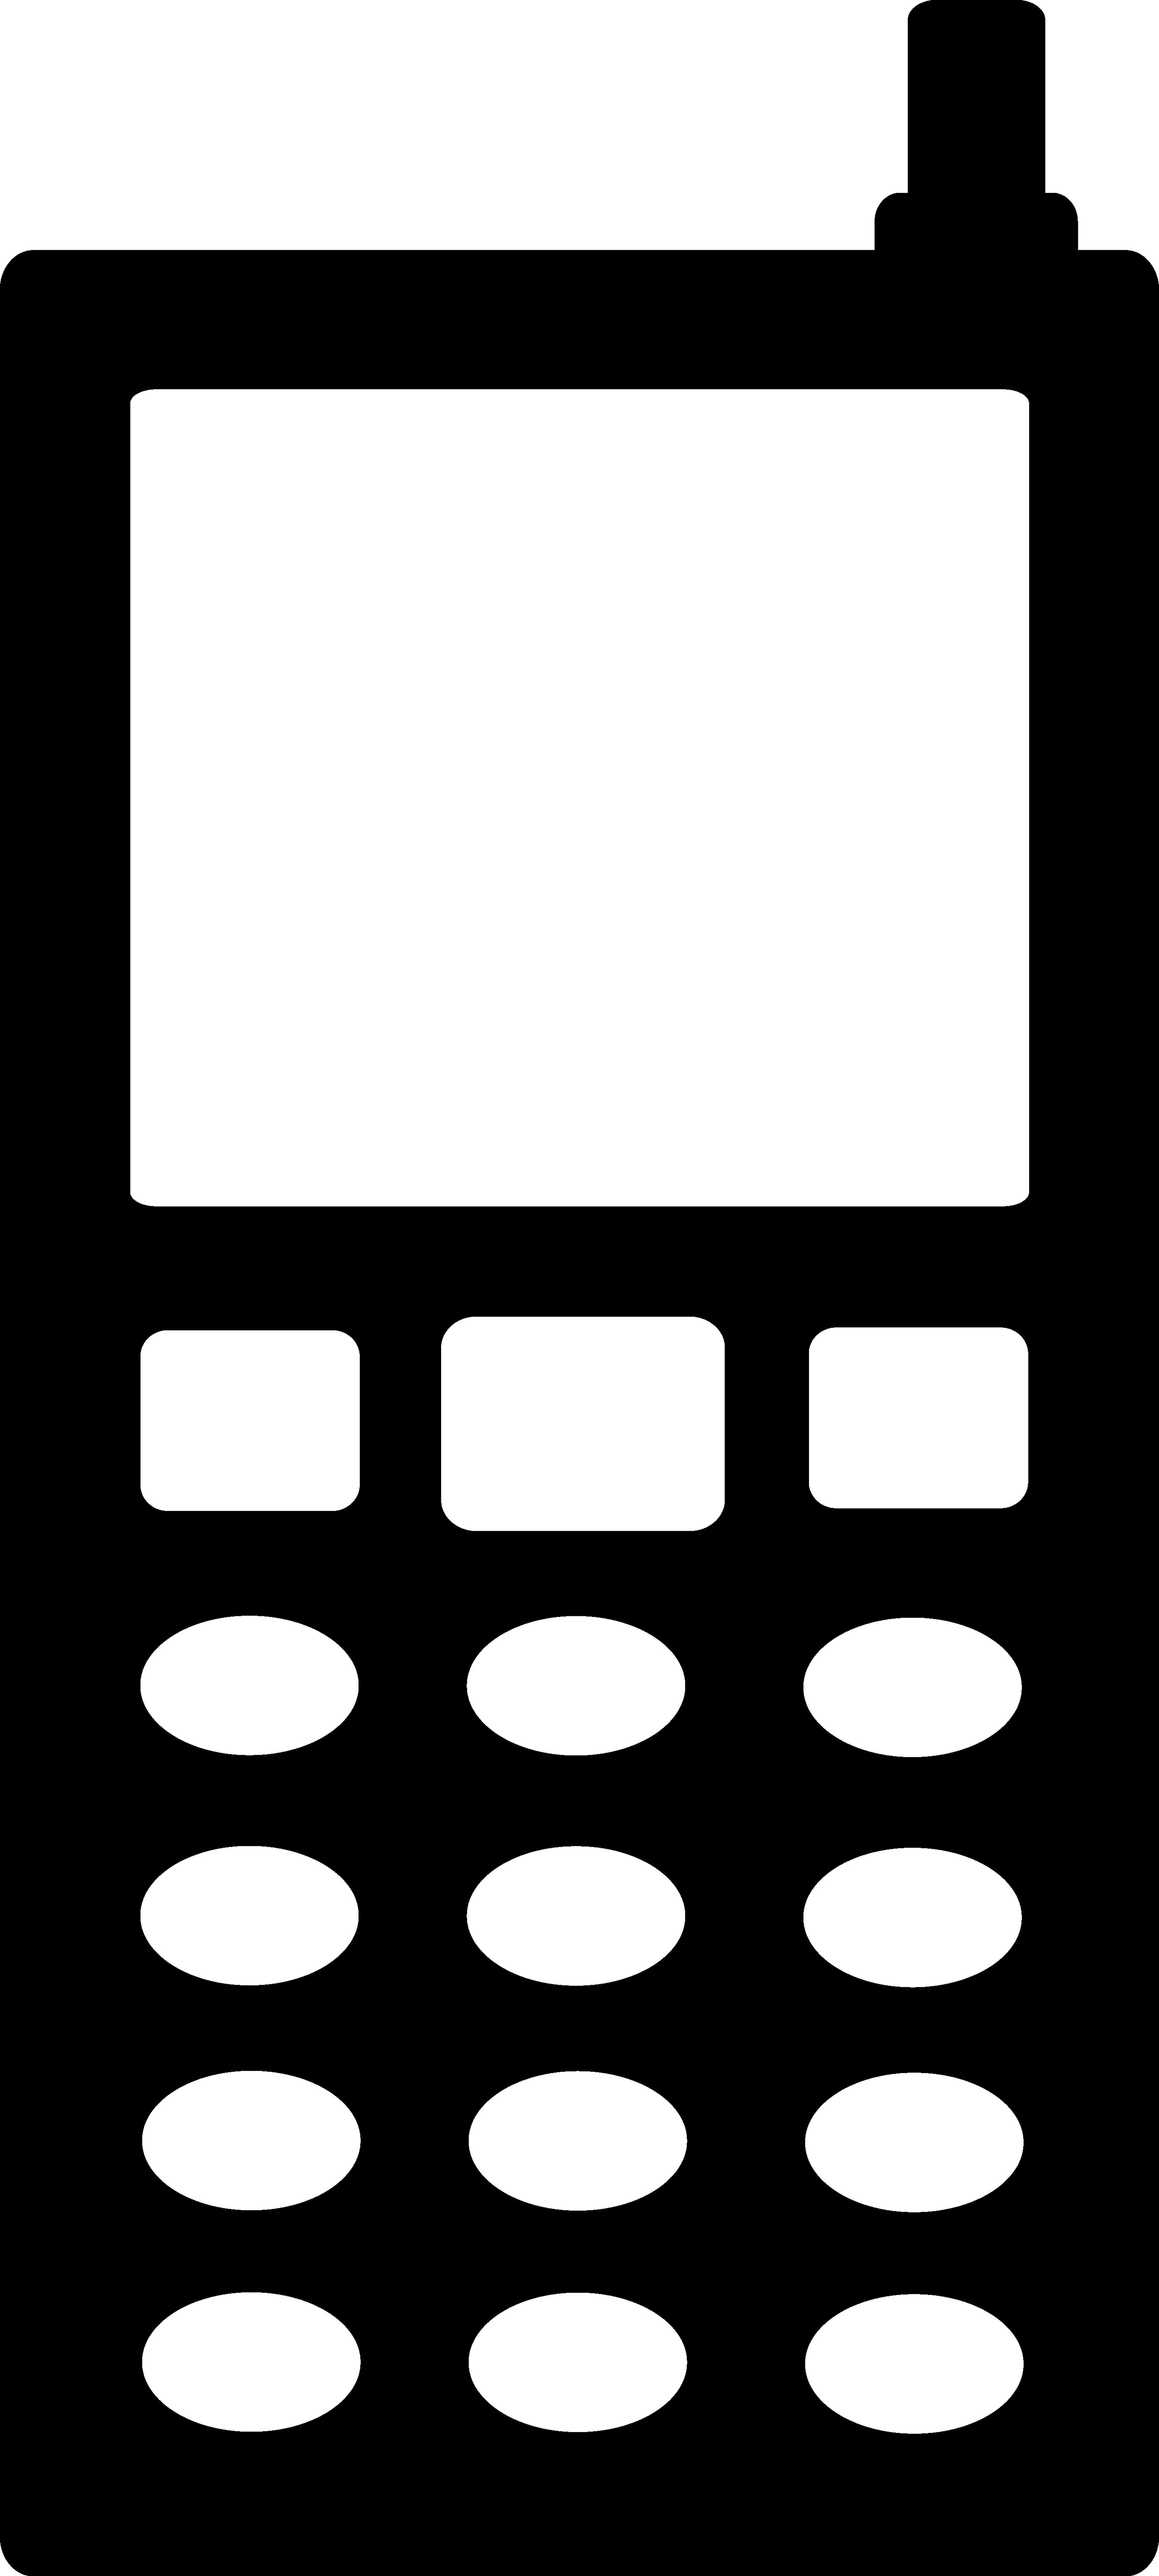 Cell phone mobile phone clipart black and white clipart free